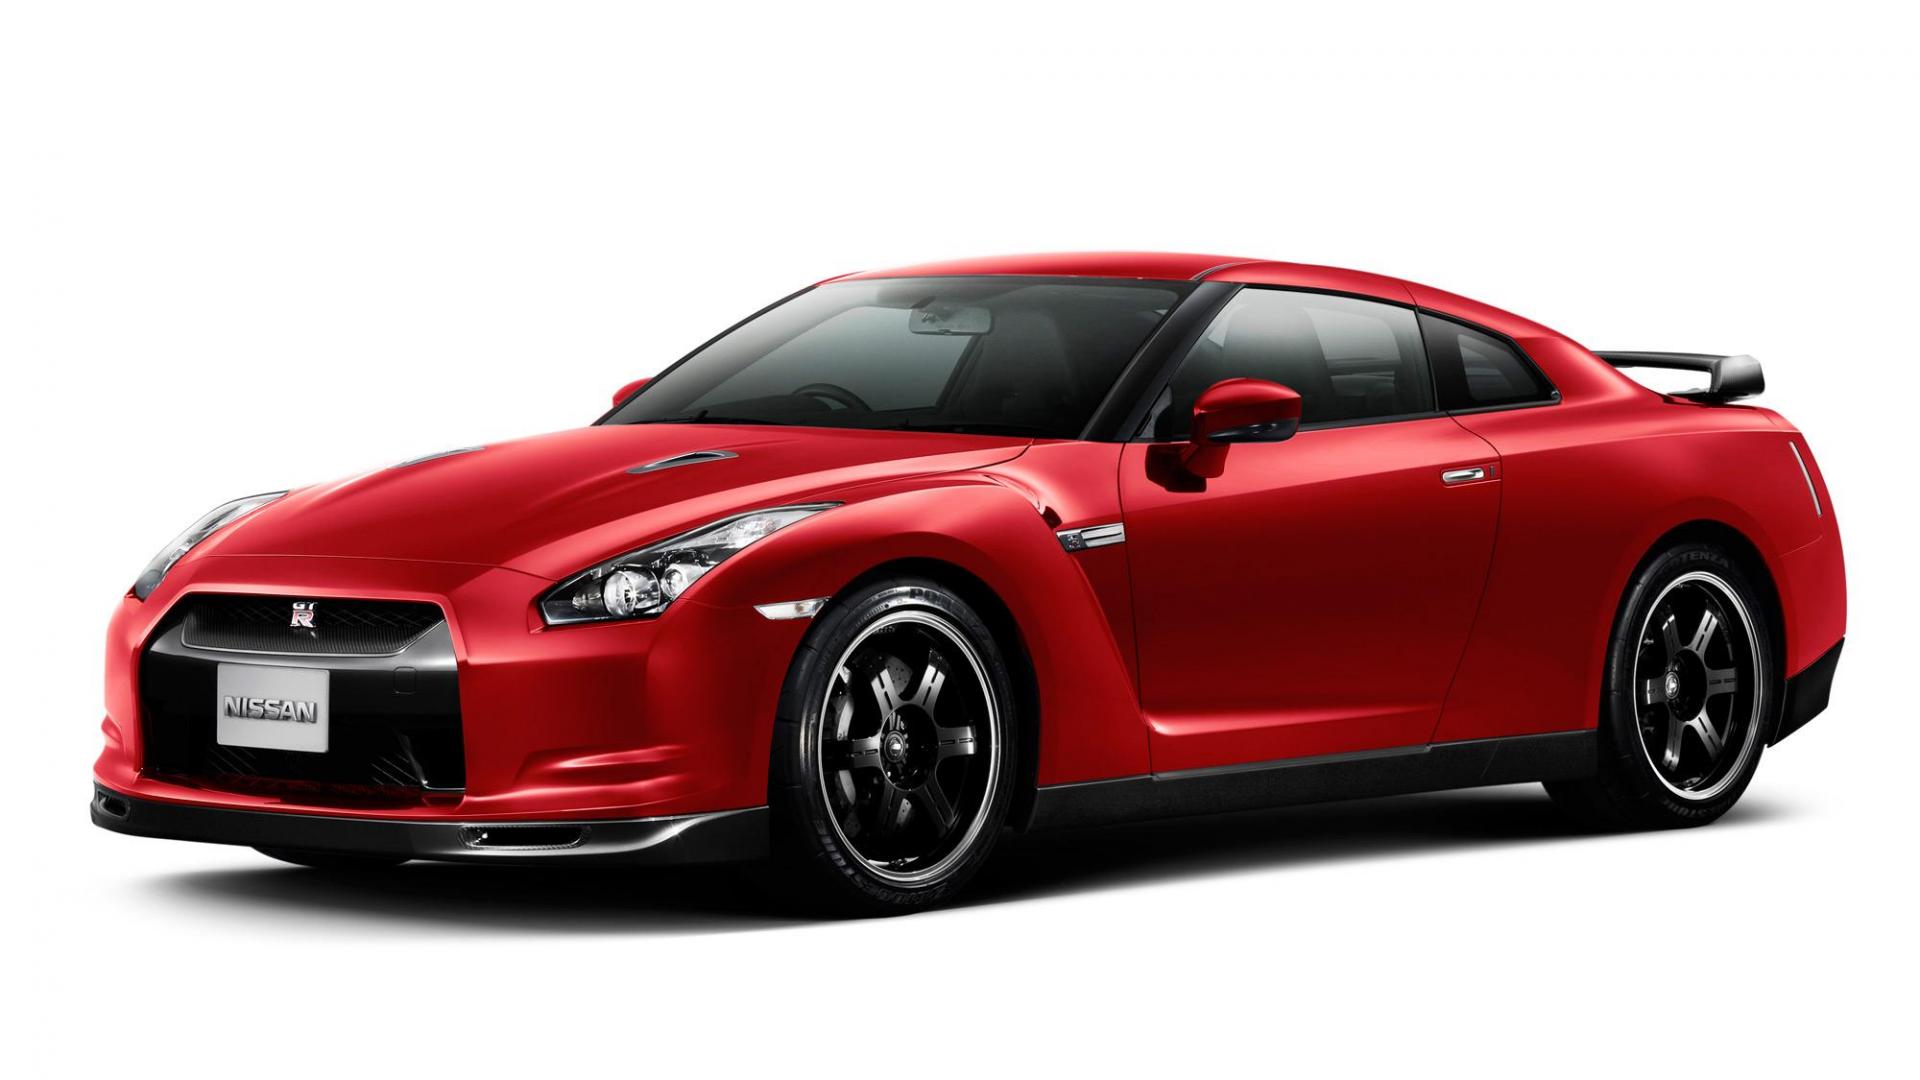 Gtr Spev V In Red High Quality And Resolution Wallpaper